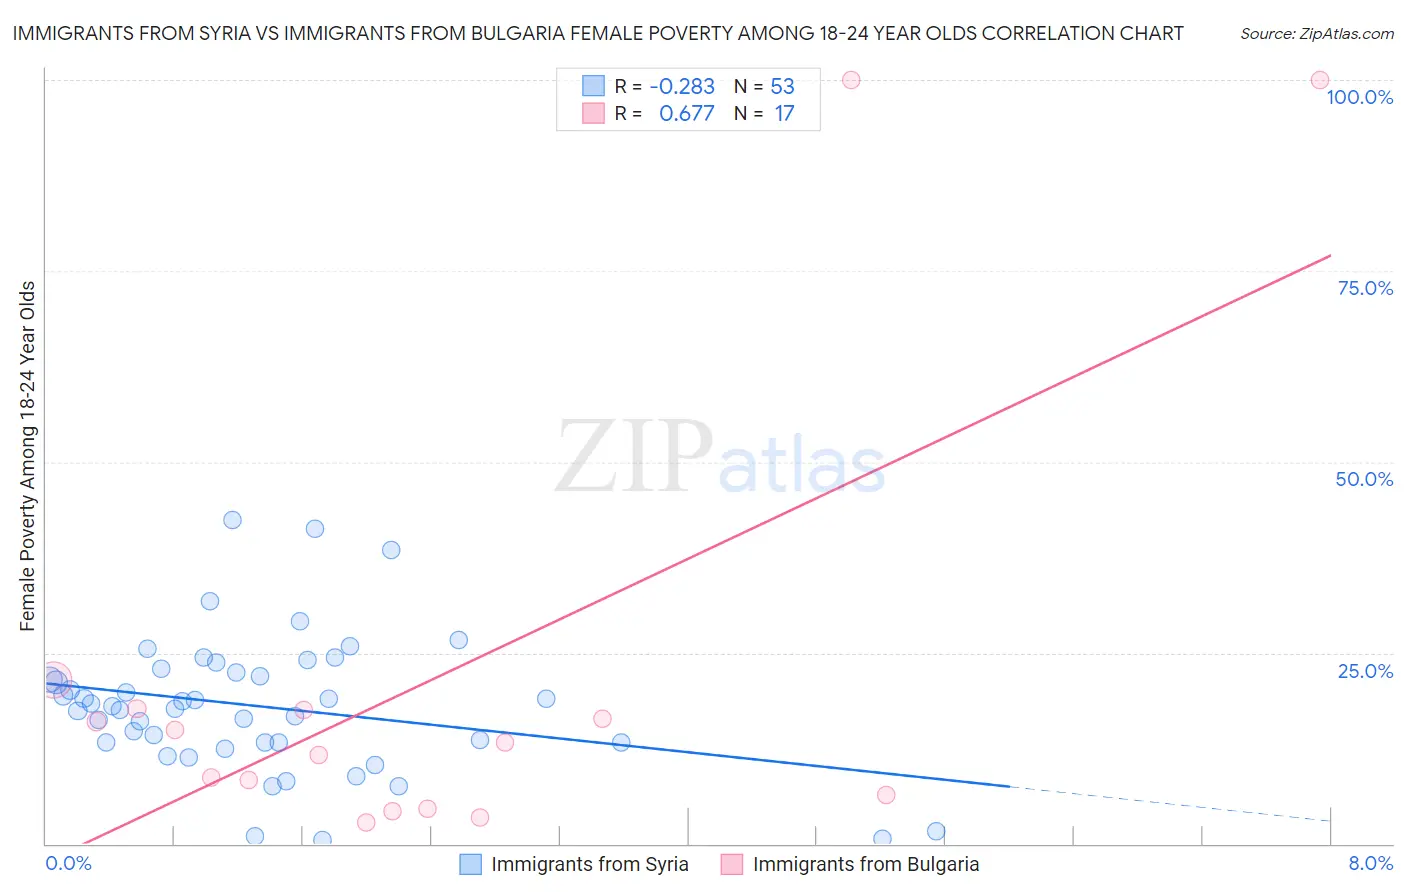 Immigrants from Syria vs Immigrants from Bulgaria Female Poverty Among 18-24 Year Olds